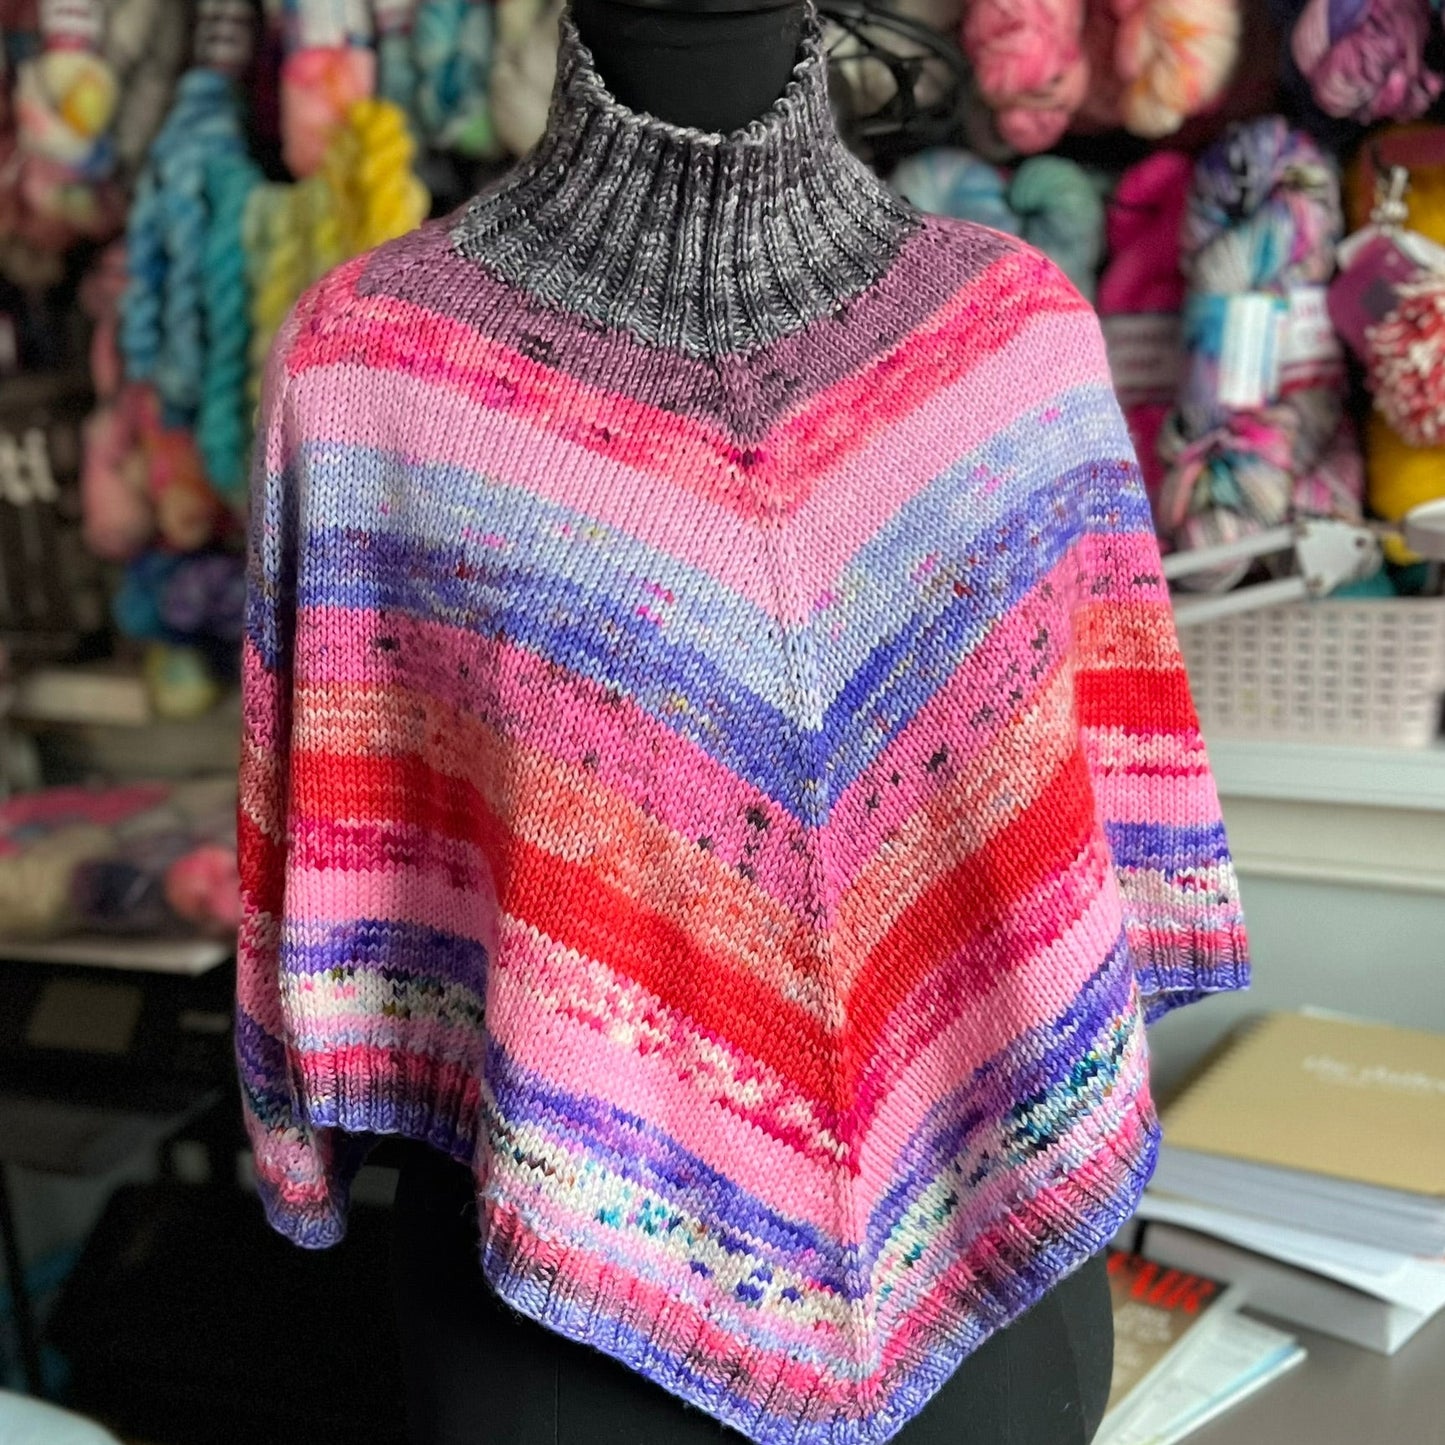 Poncho Knitting Project Kit - Coorie in Poncho by Amy Palko